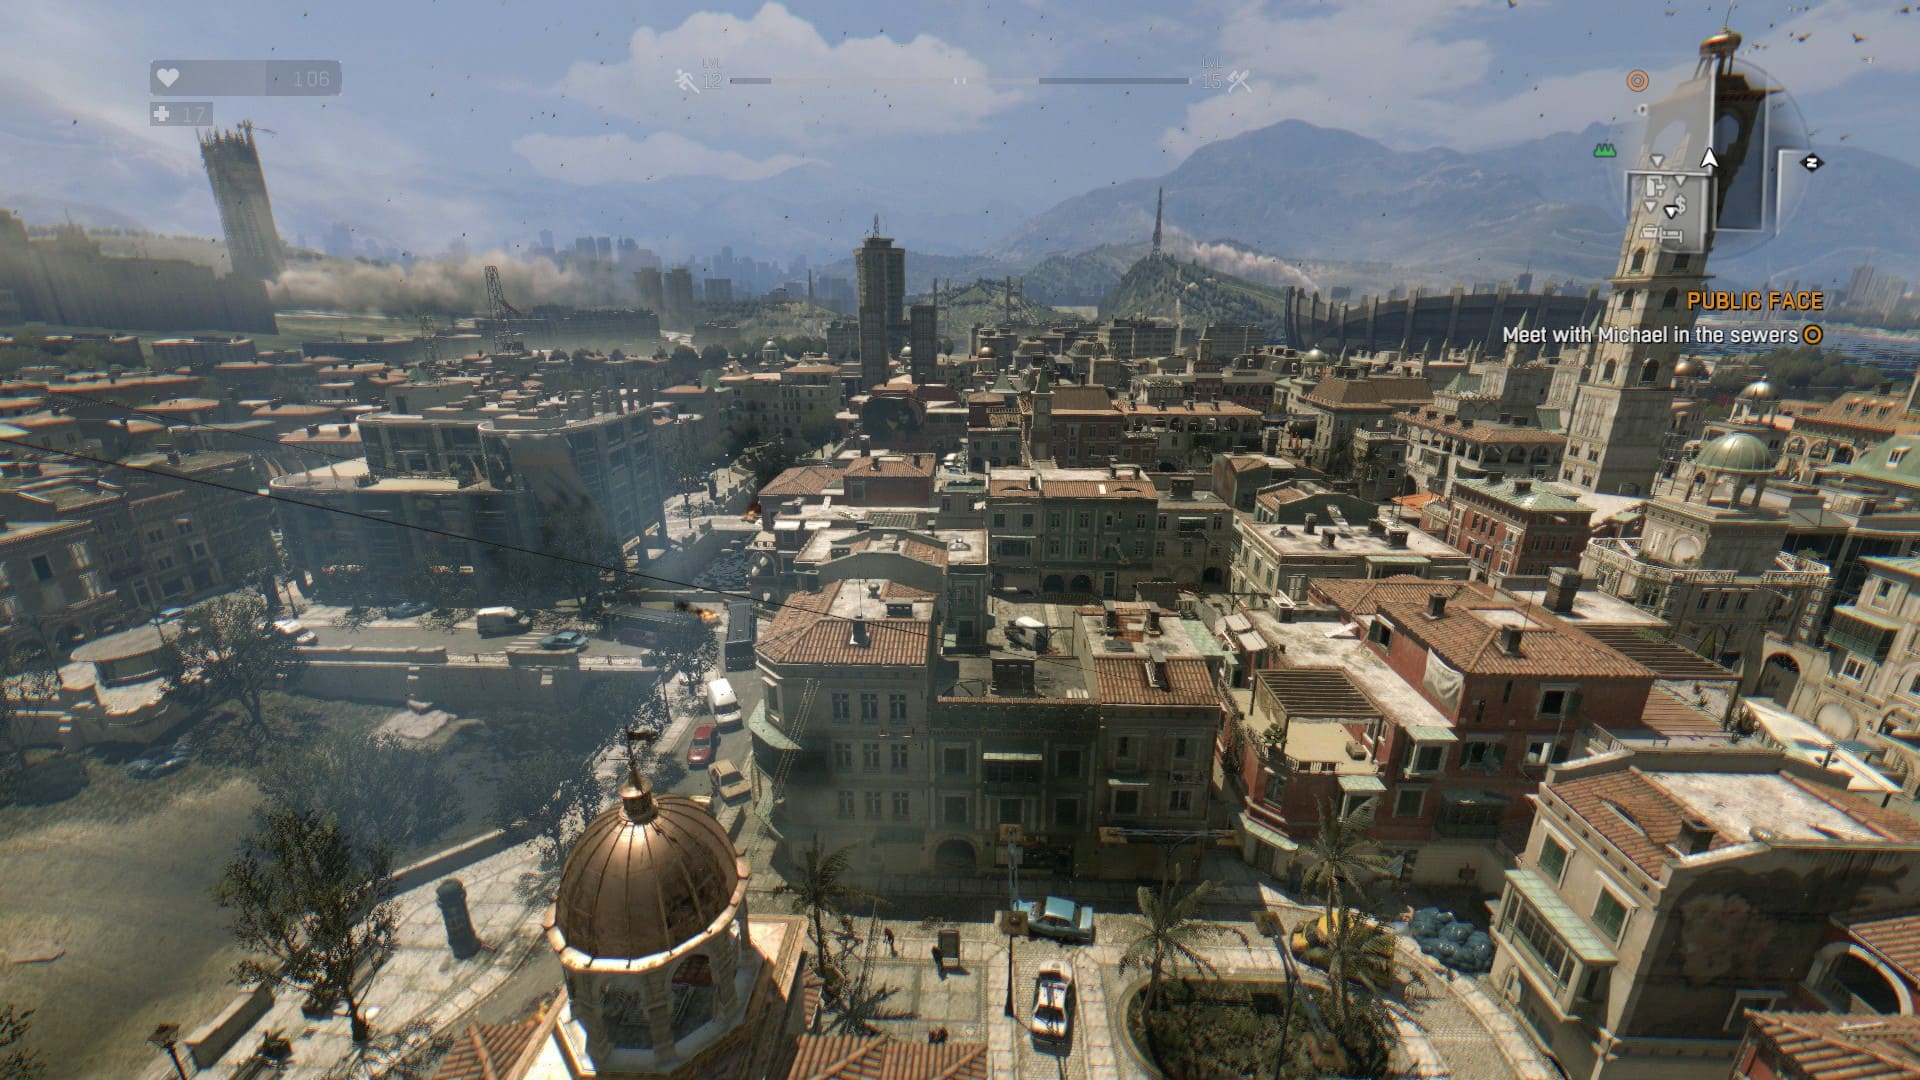 dying-light-view-distance-002-patch-1-2-1-65-percent.jpg